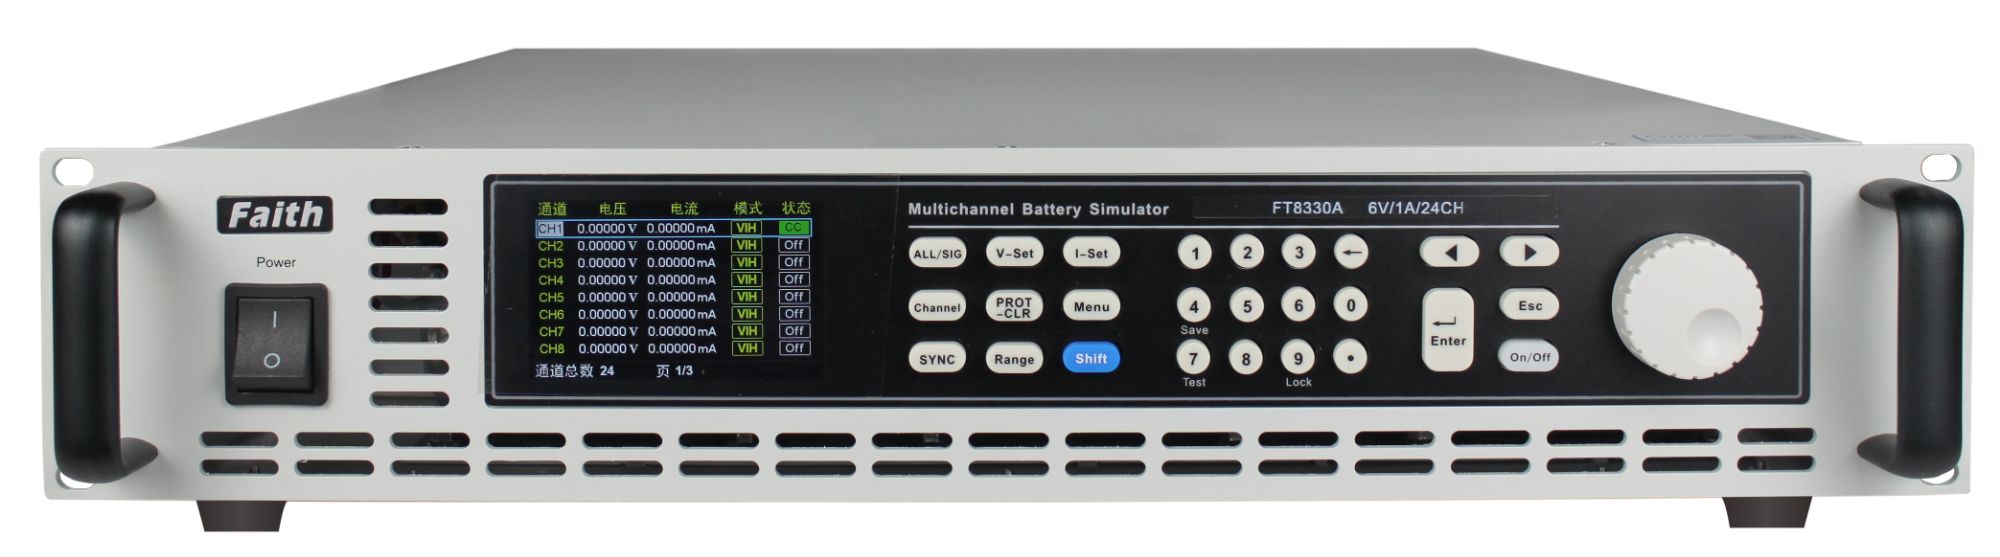 FT8330 Multi-channel DC power supply/ Battery Simulator